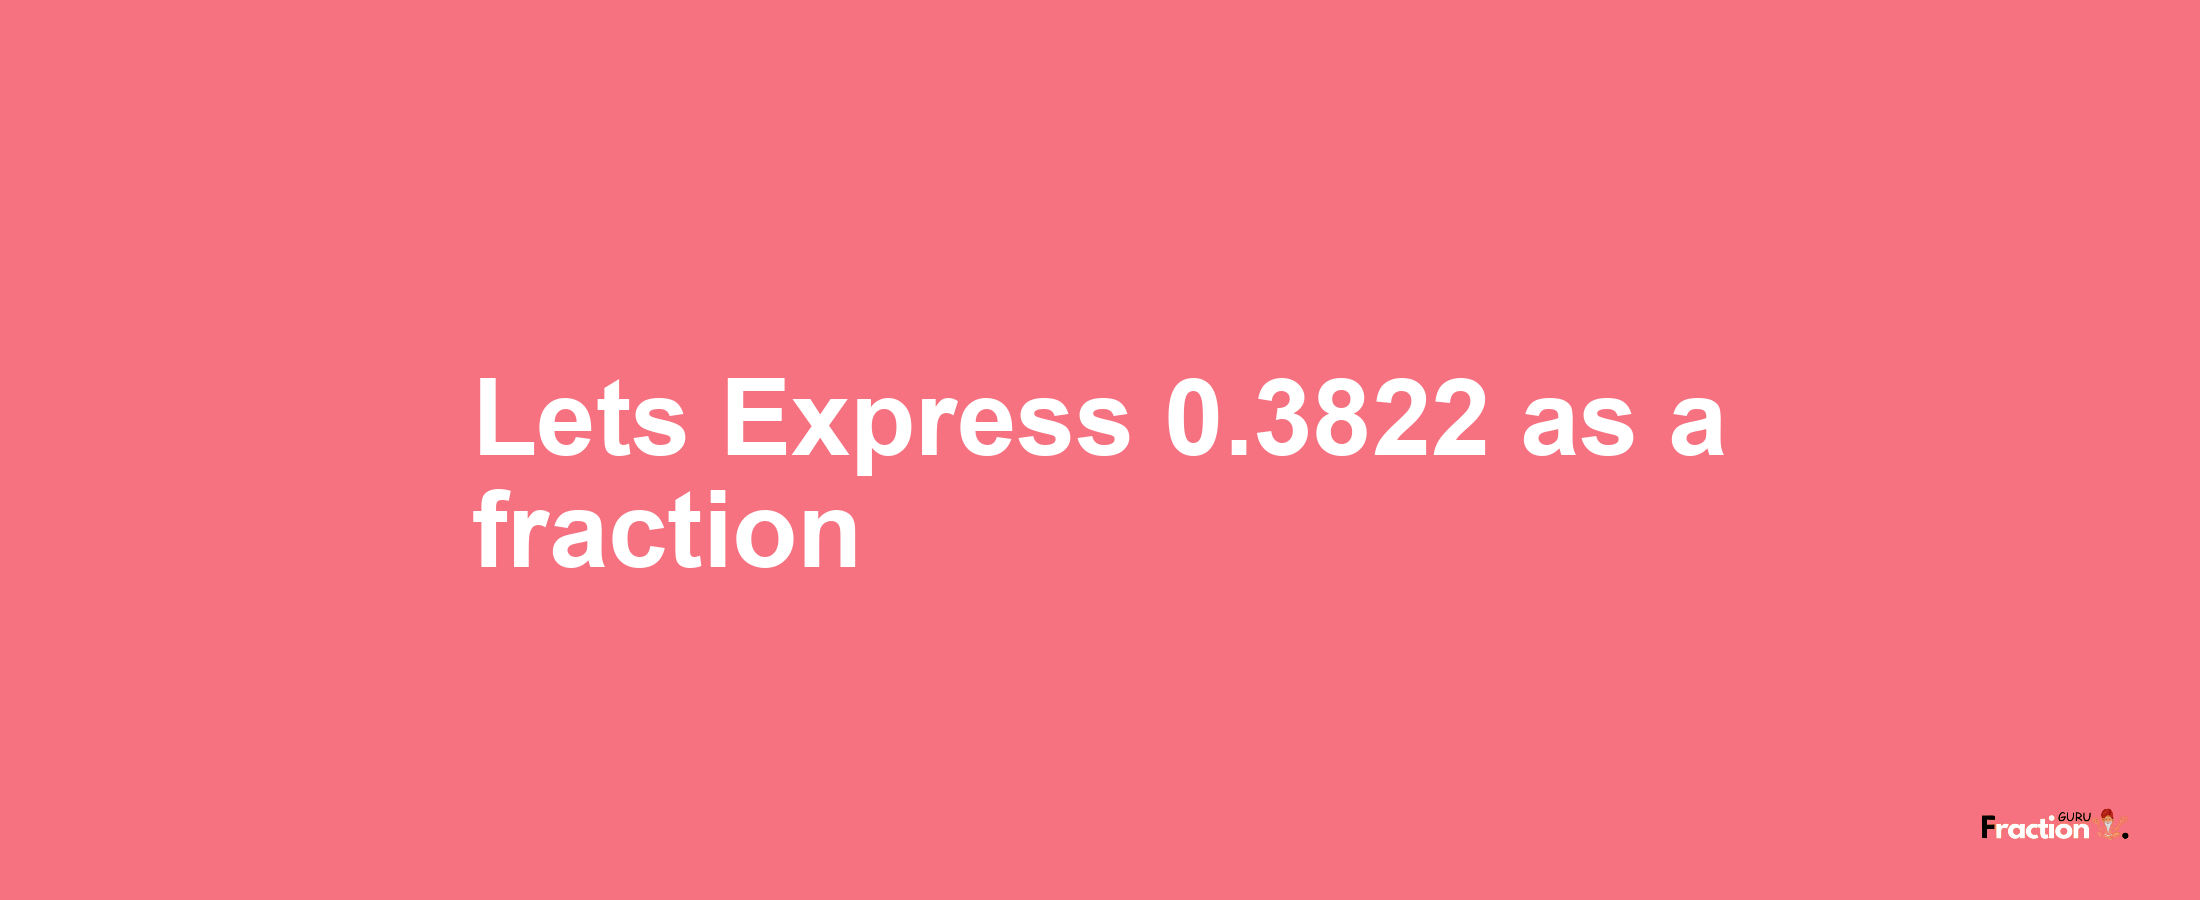 Lets Express 0.3822 as afraction